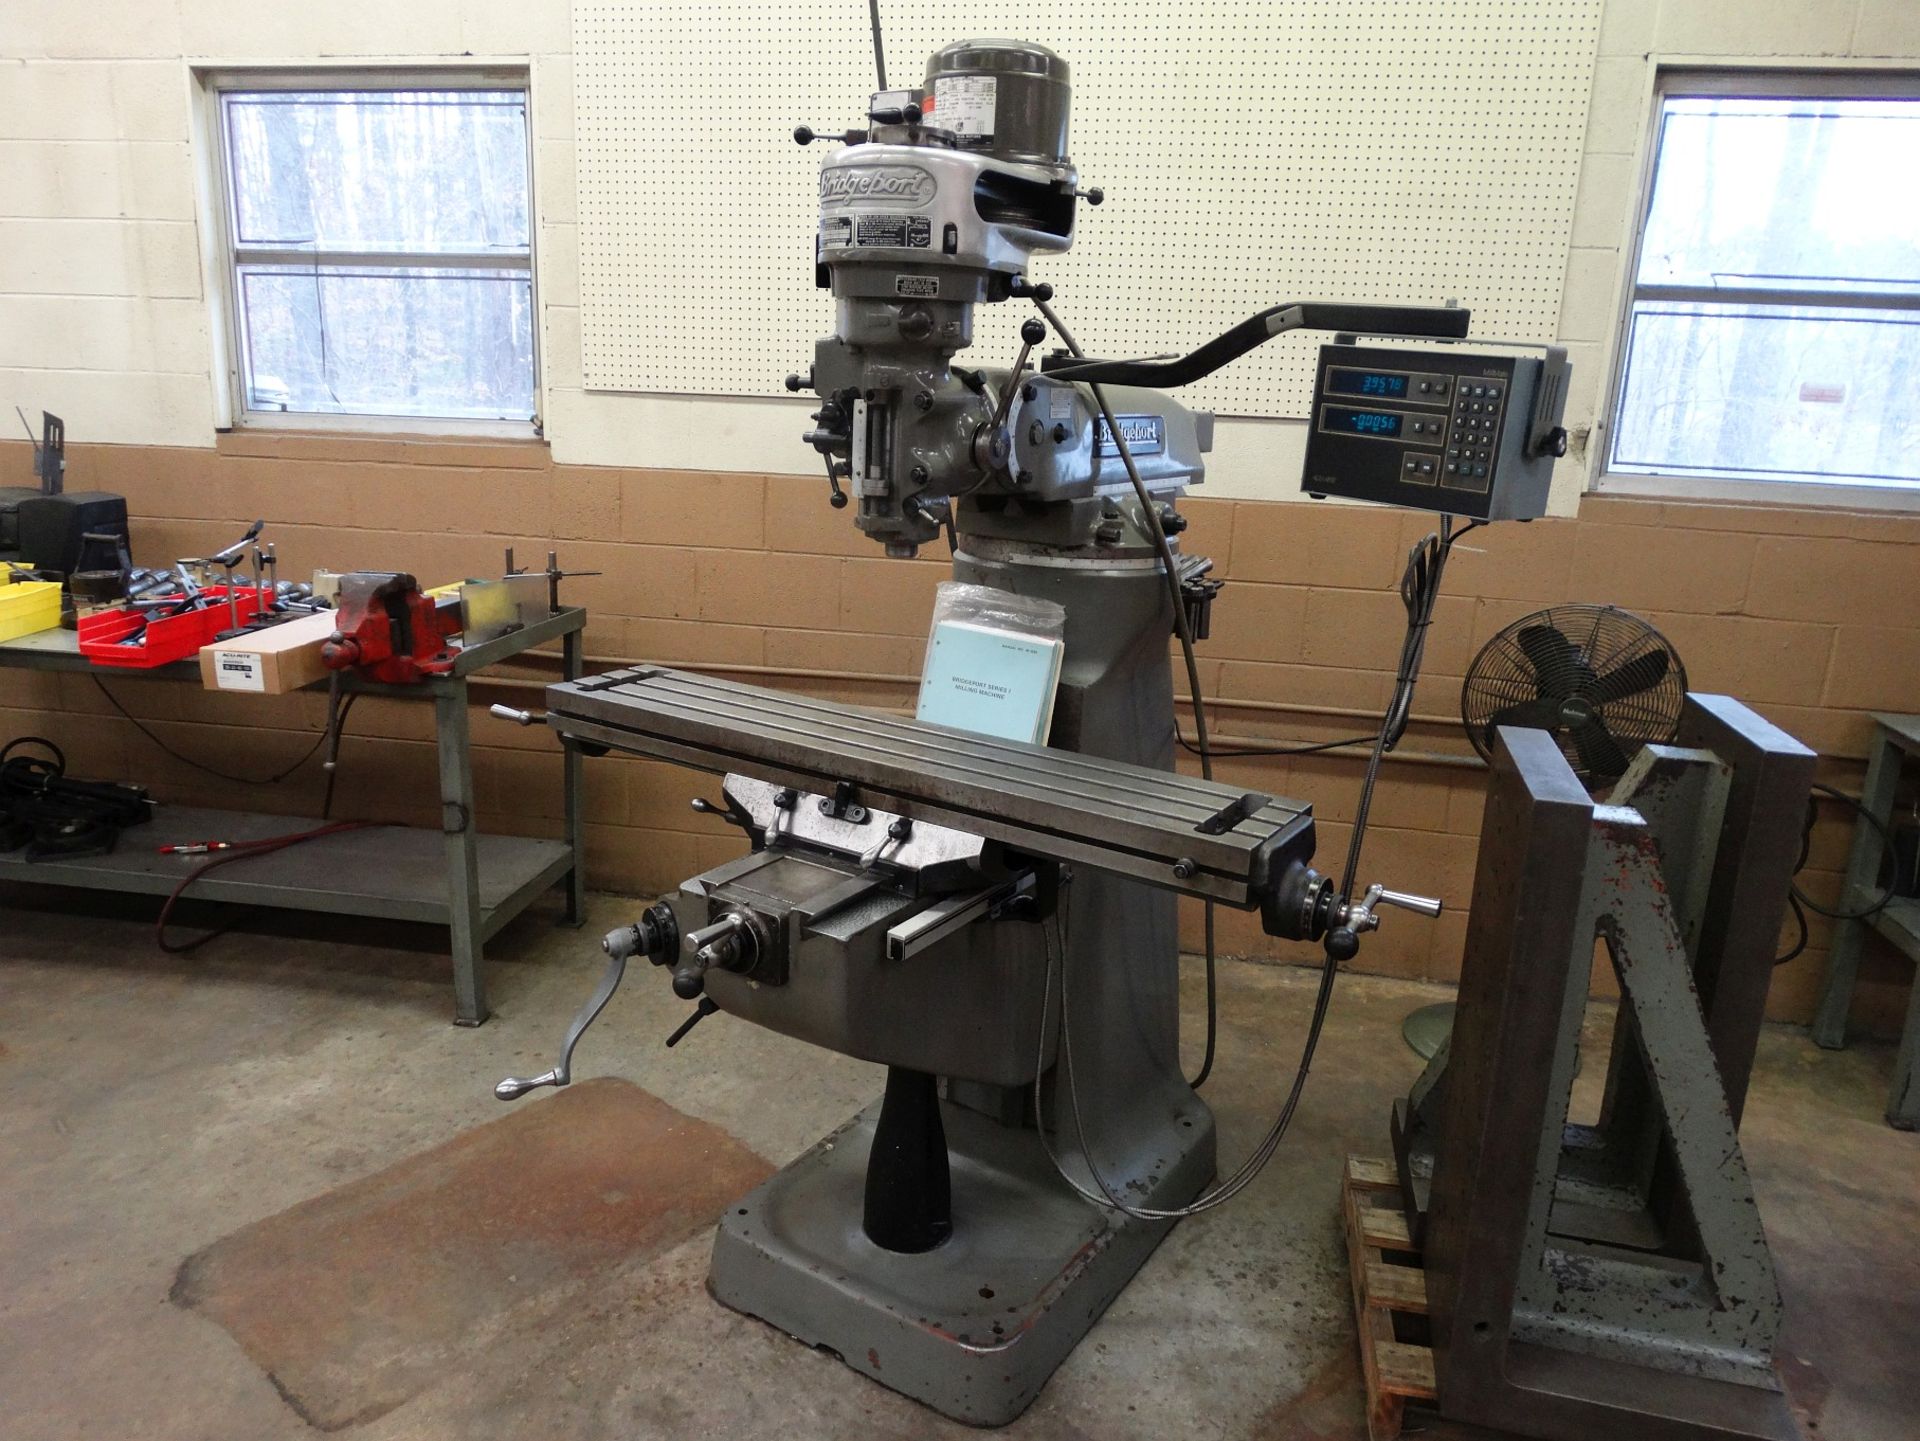 Bridgeport Series I Vertical Mill, 9" x 48" table, Chrome Hard Ways, SN BR271853, w/ AccuRite - Image 2 of 2